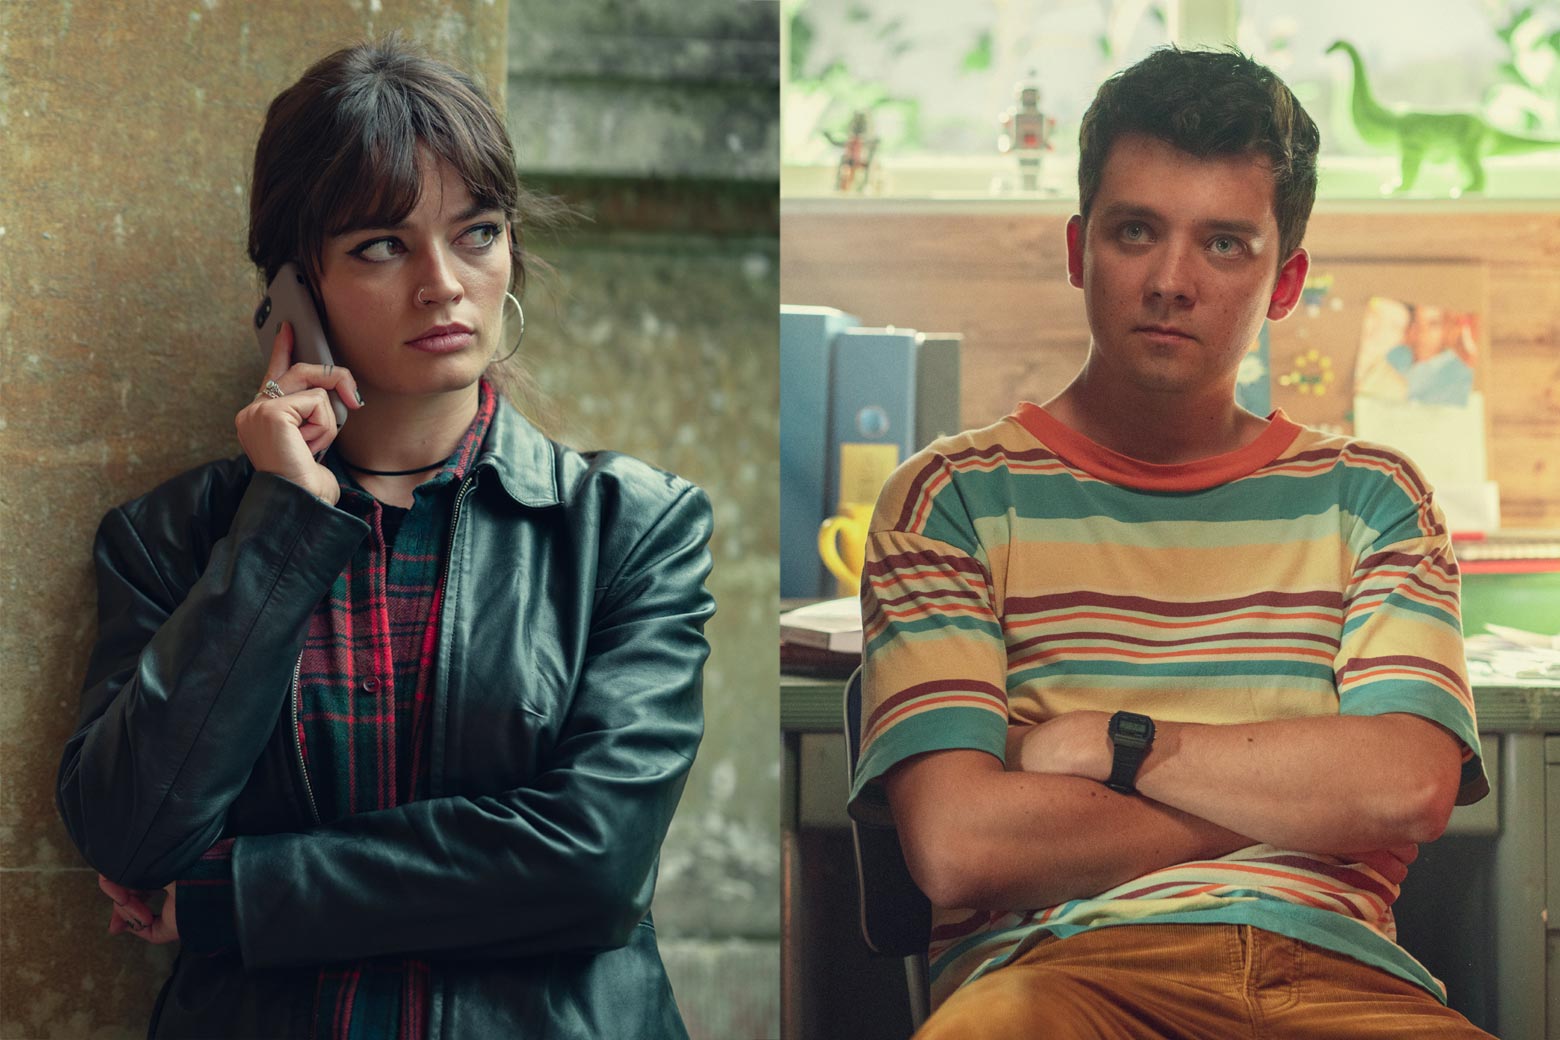 Left: Maeve played by Emma Mackey. Right: Otis played by Asa Butterfield.